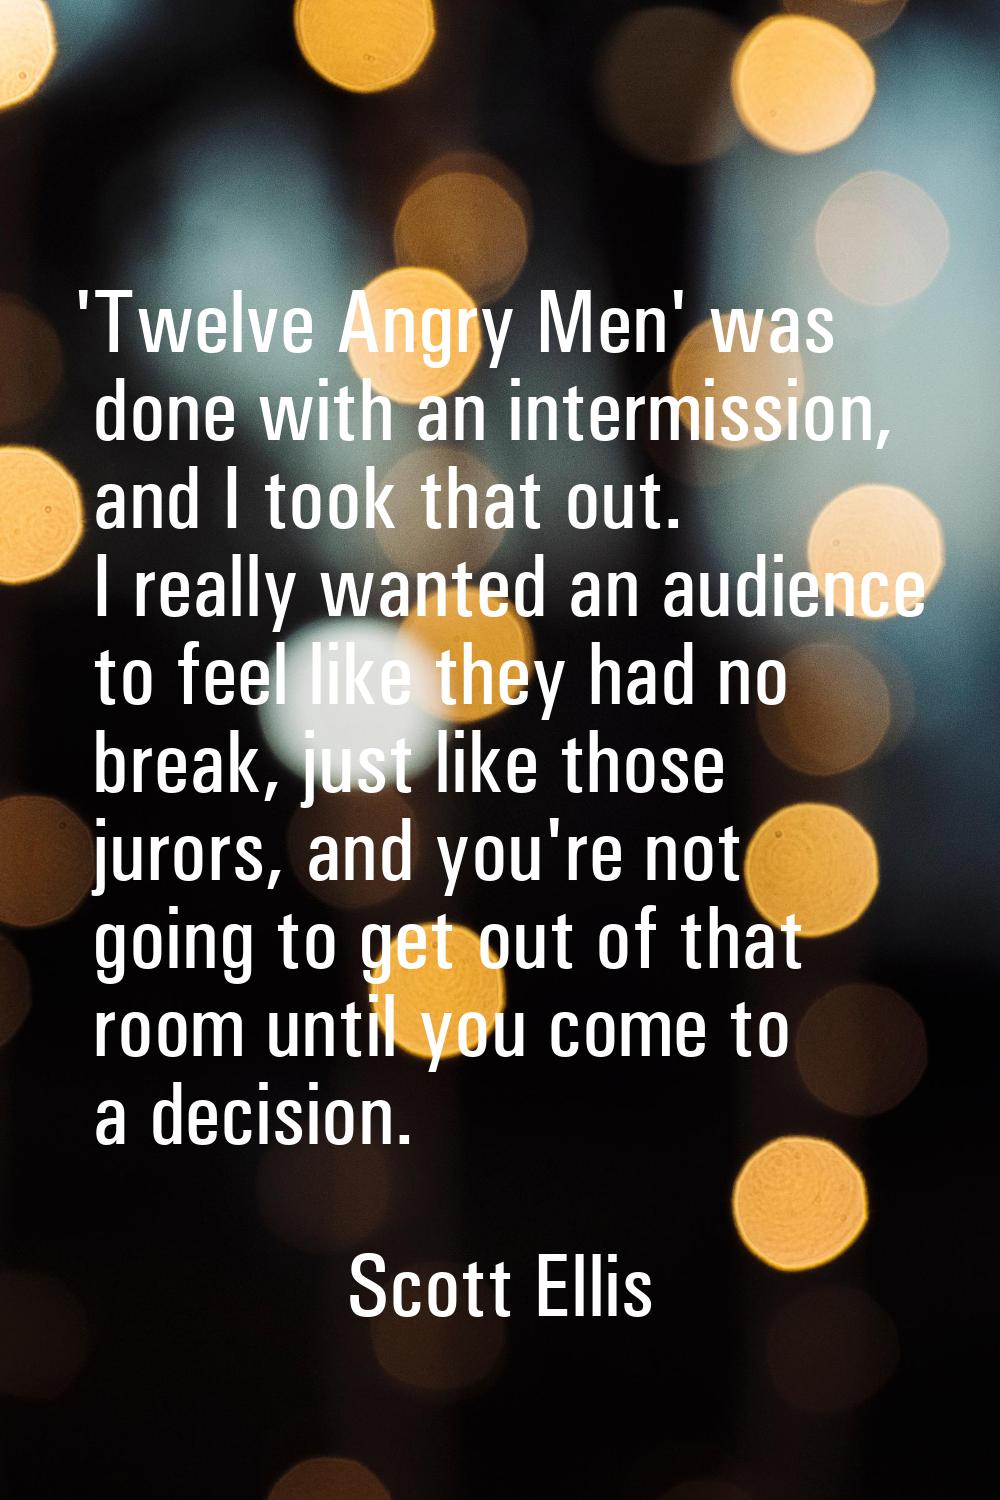 'Twelve Angry Men' was done with an intermission, and I took that out. I really wanted an audience 